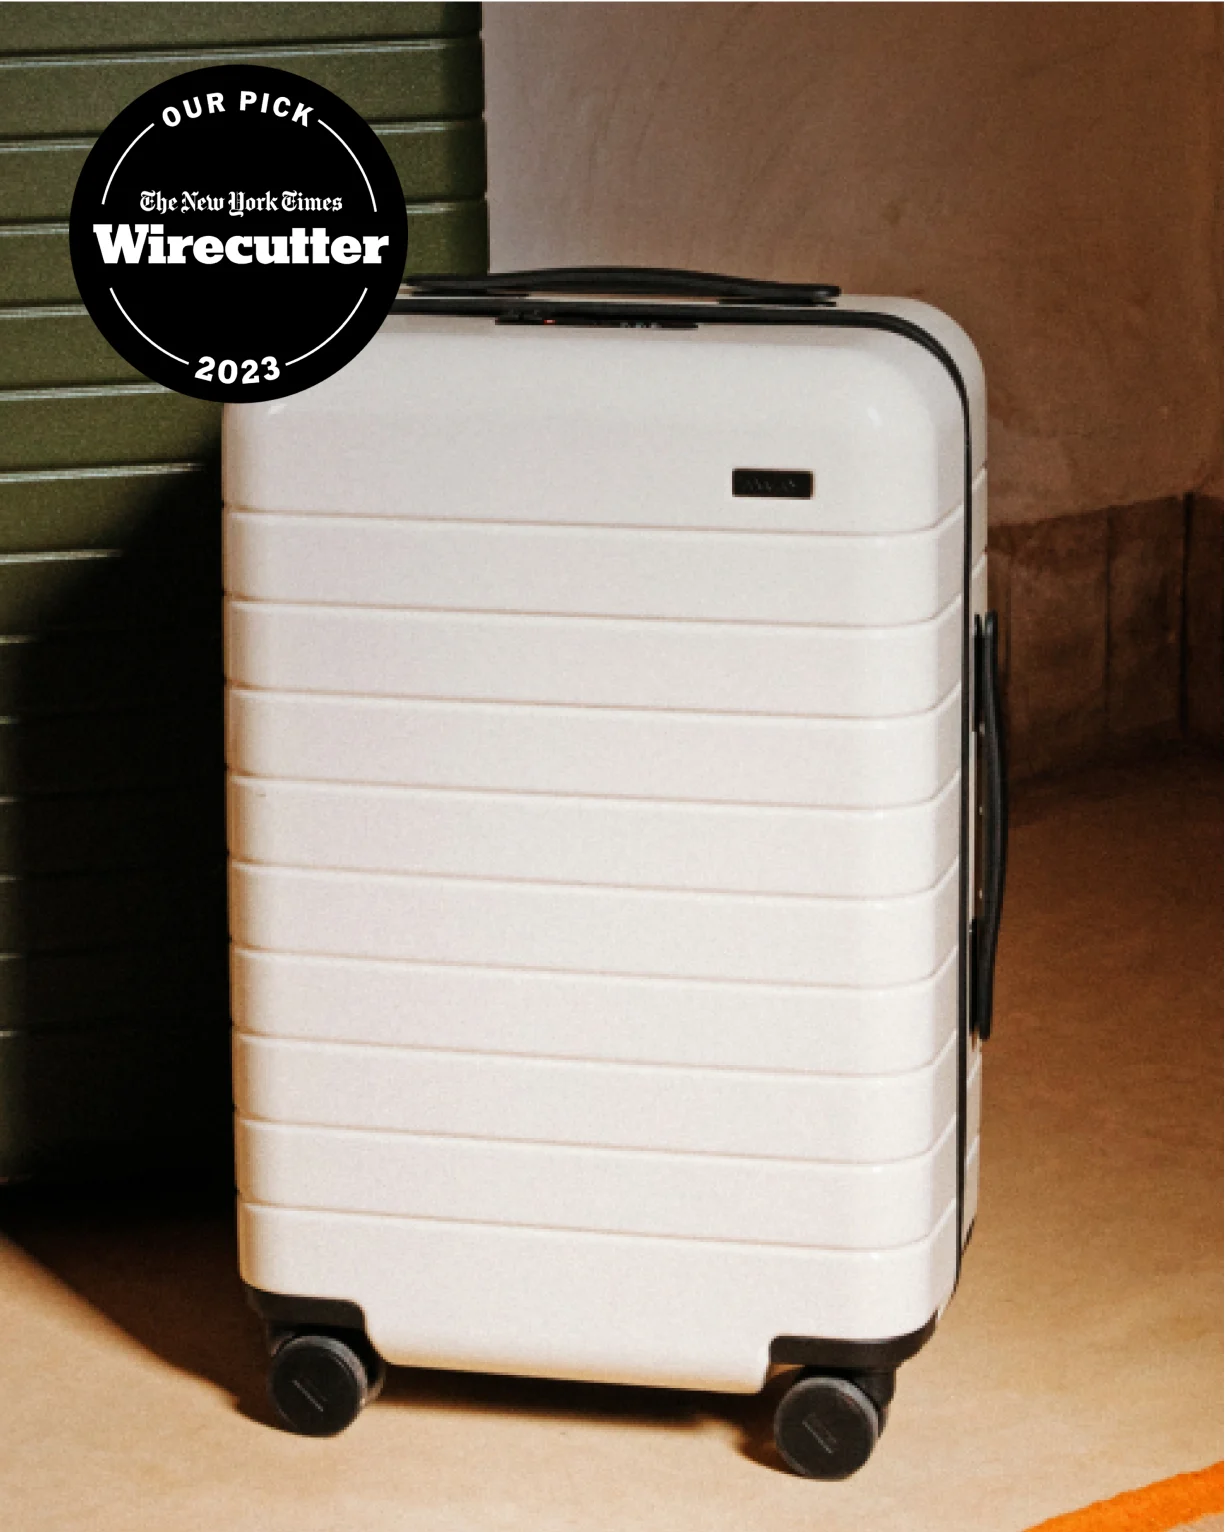 waterproof travel luggage for sale